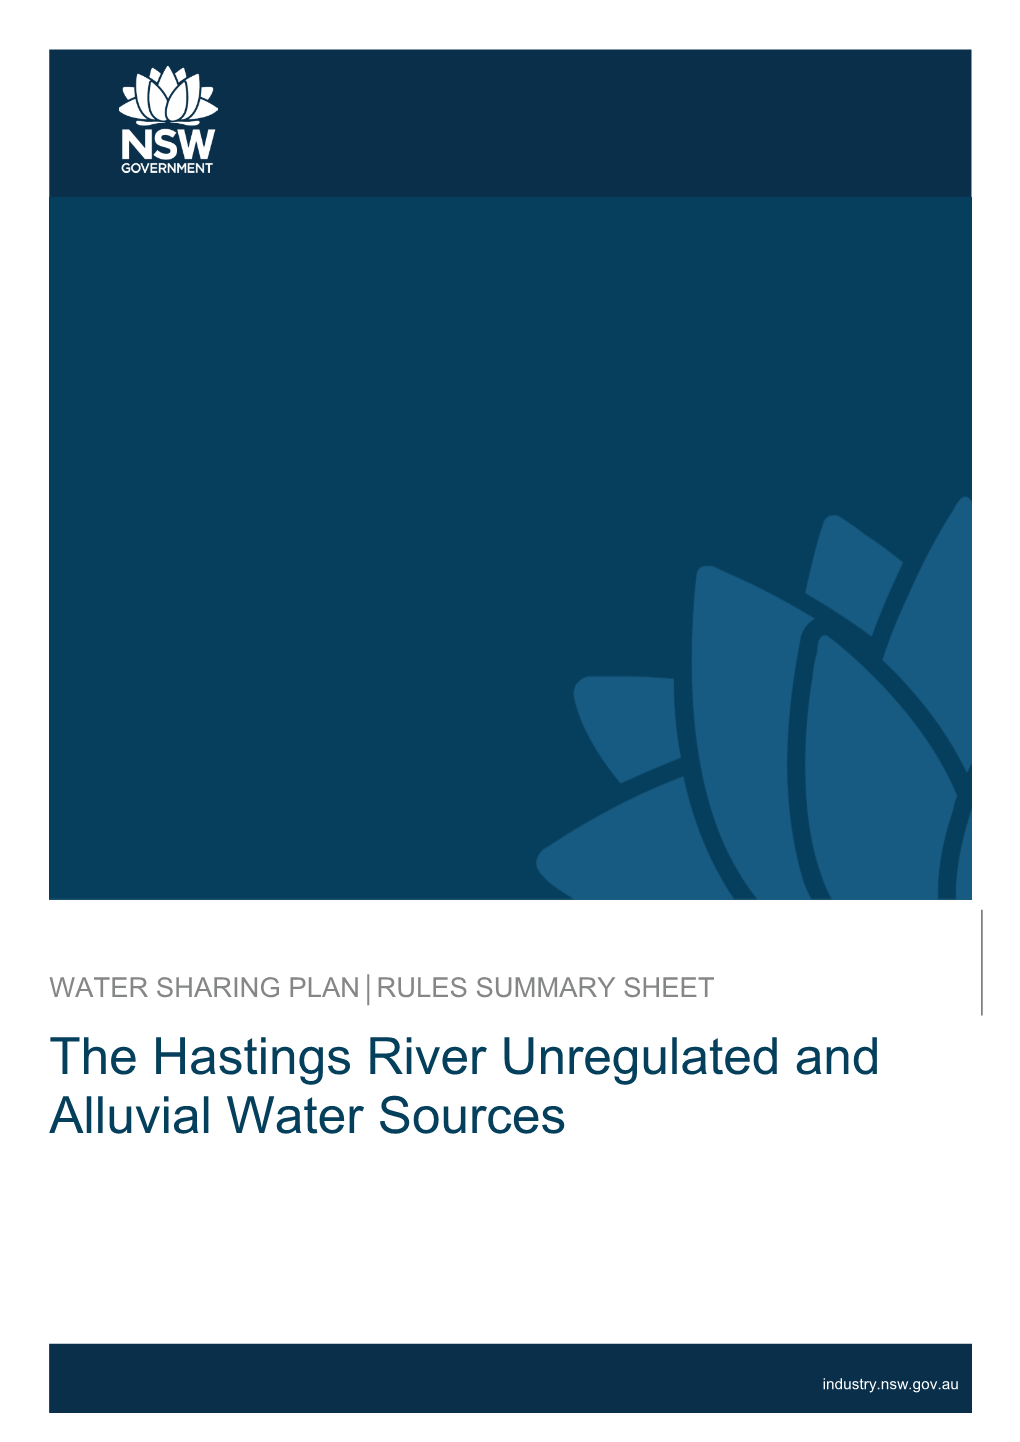 Hastings River Unregulated and Alluvial Water Sources